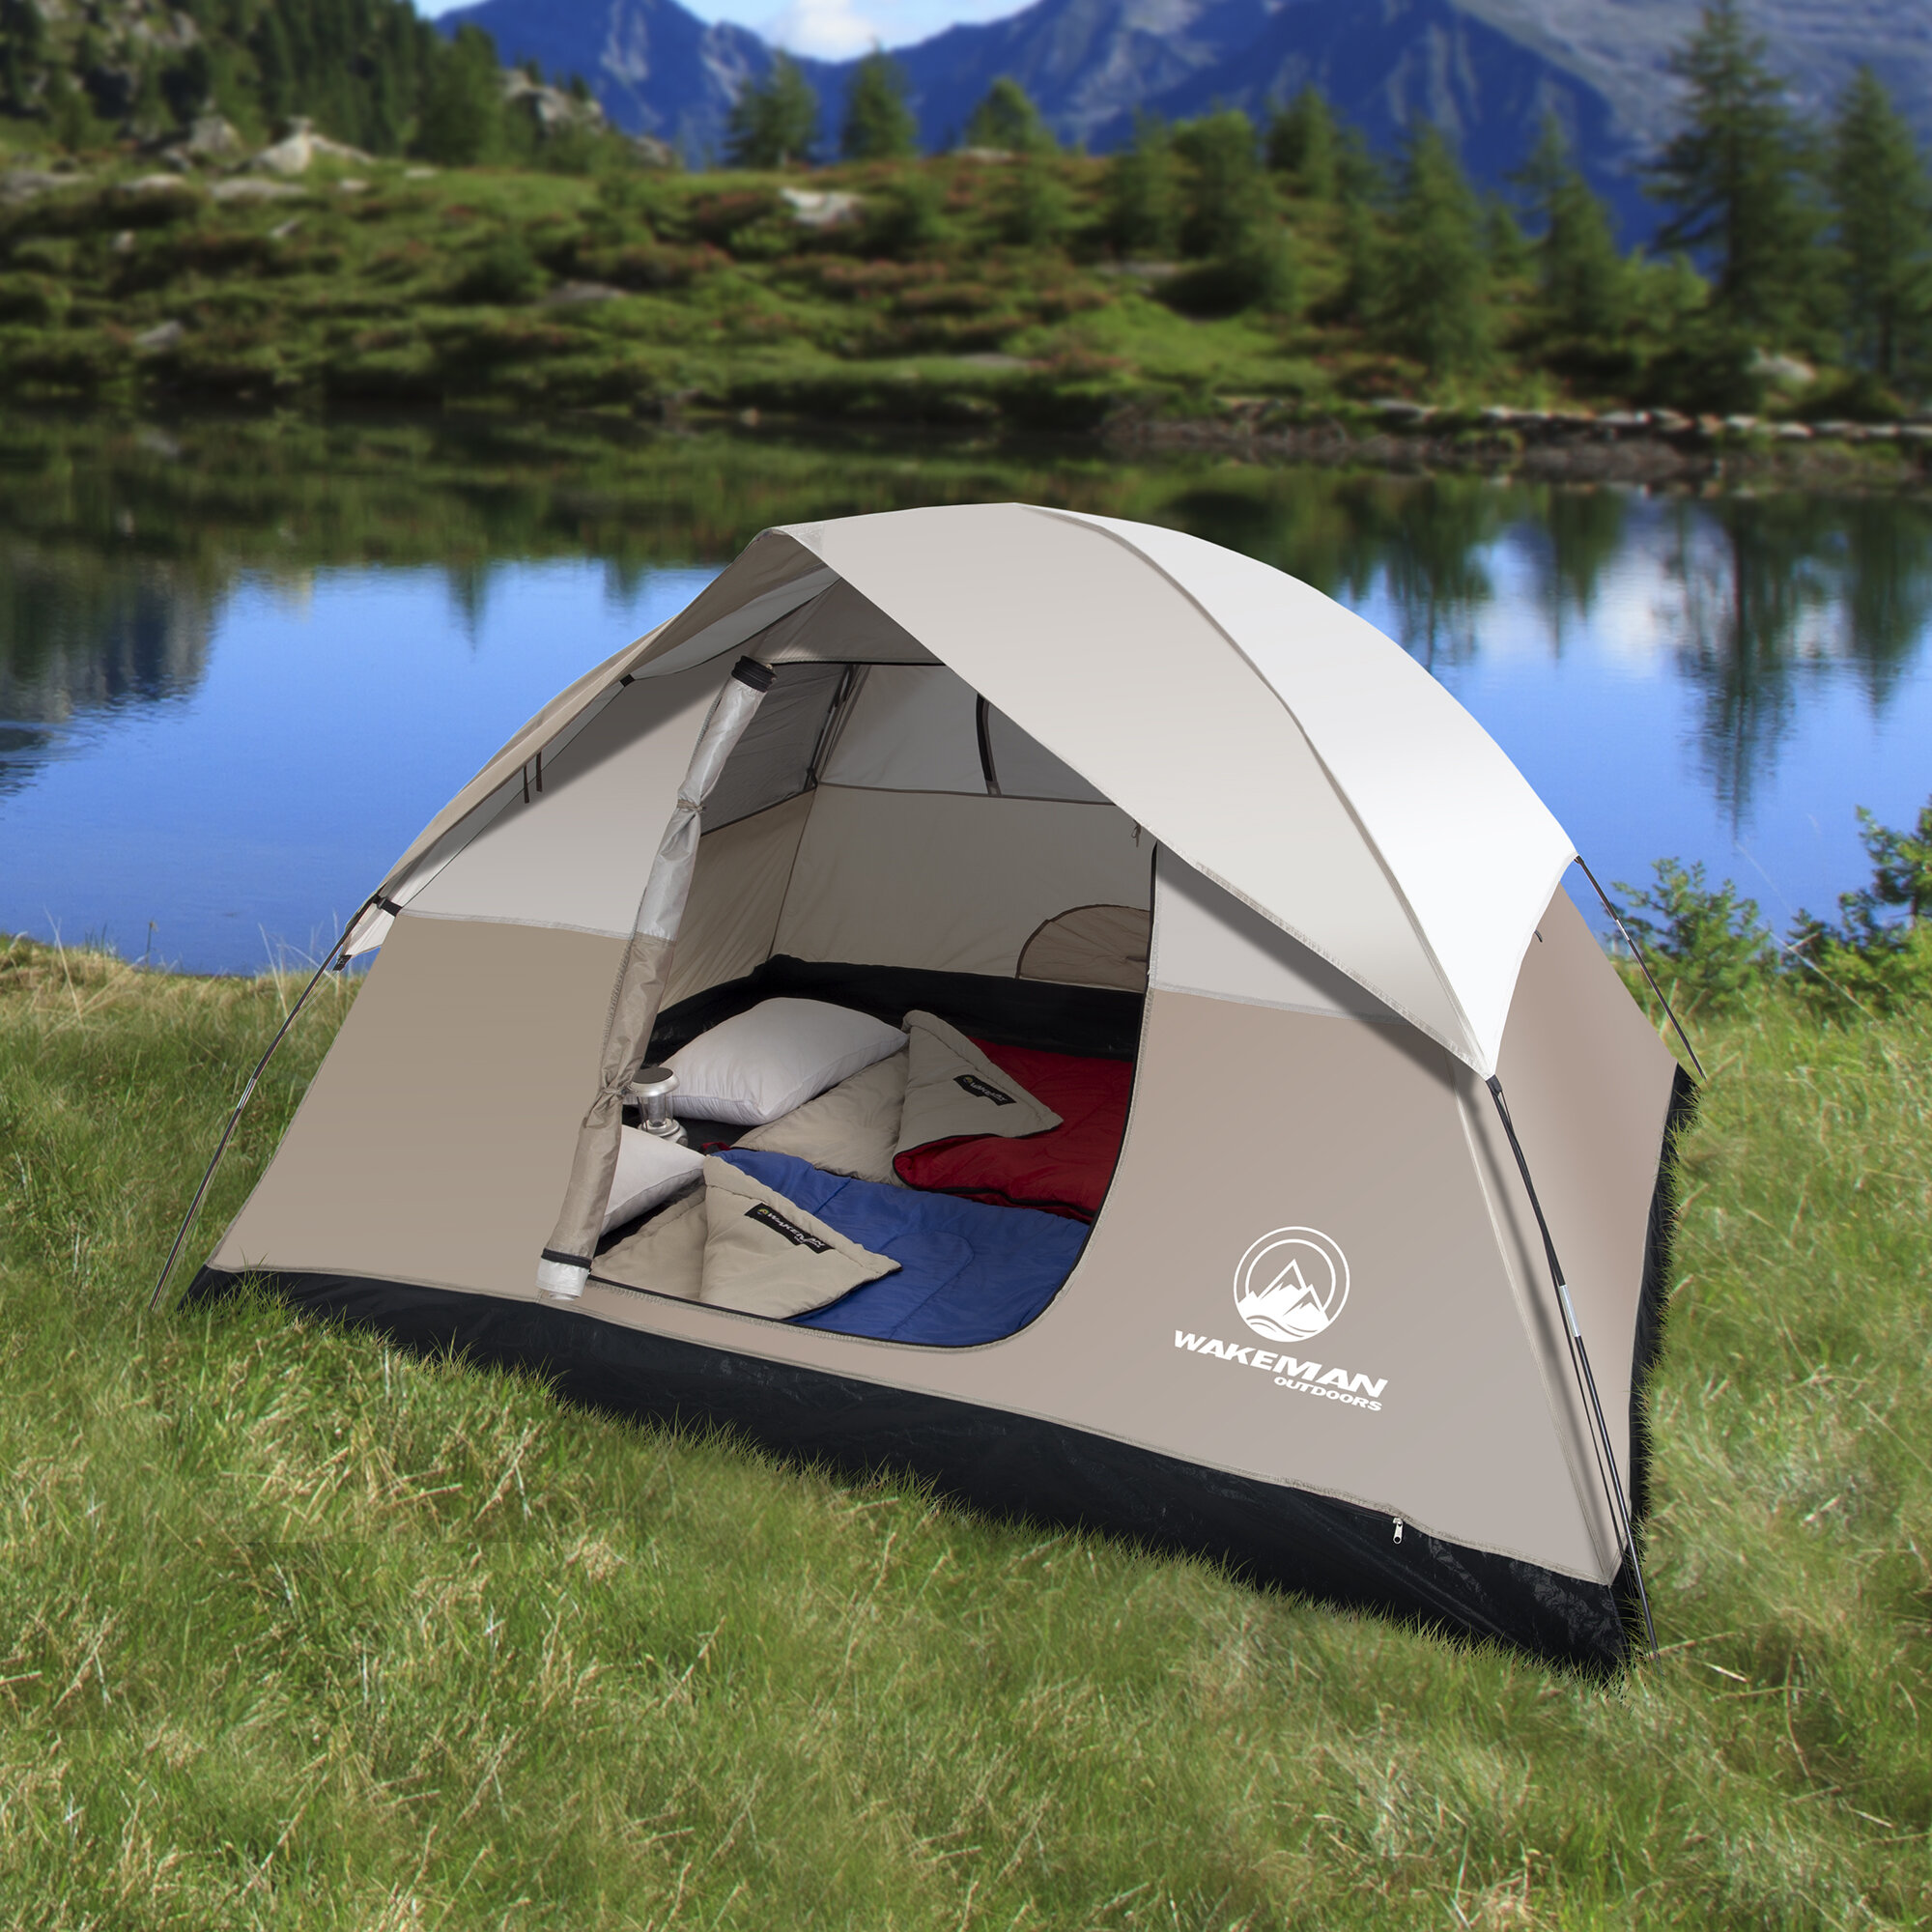 Basics 4-Person Dome Camping Tent With Rainfly - 9 x 7 x 4 Feet,  Orange And Grey : : Sports & Outdoors